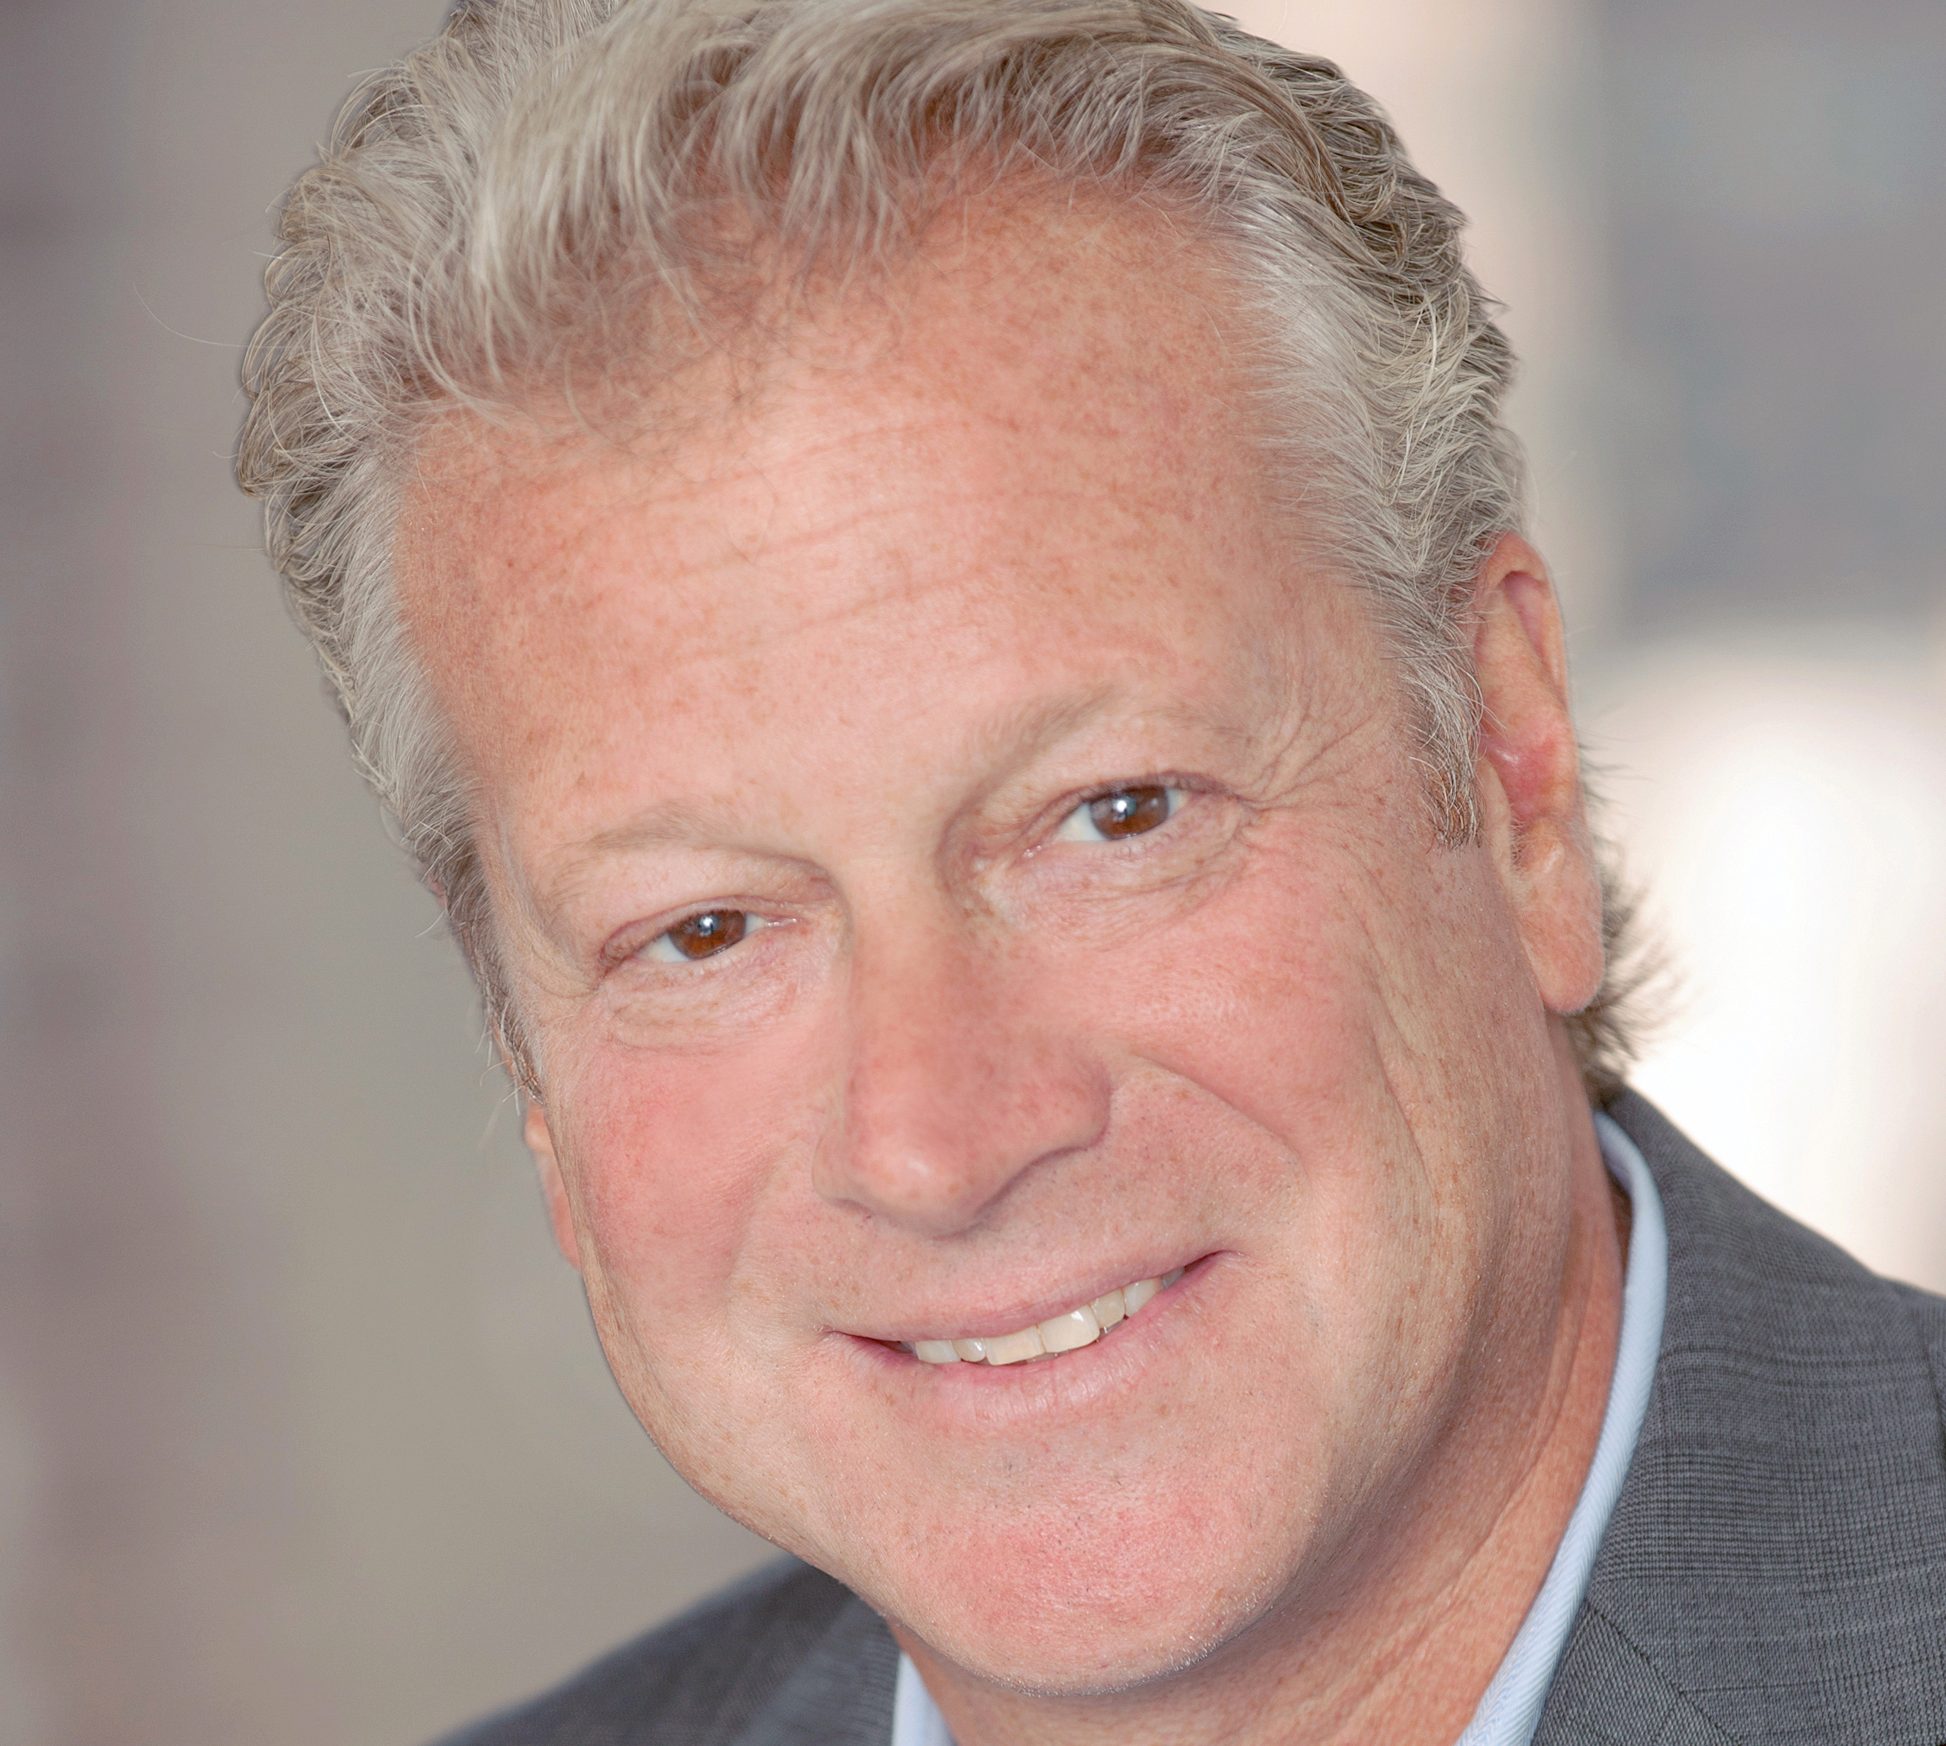 Weber Shandwick CEO to Address UA Students, Faculty